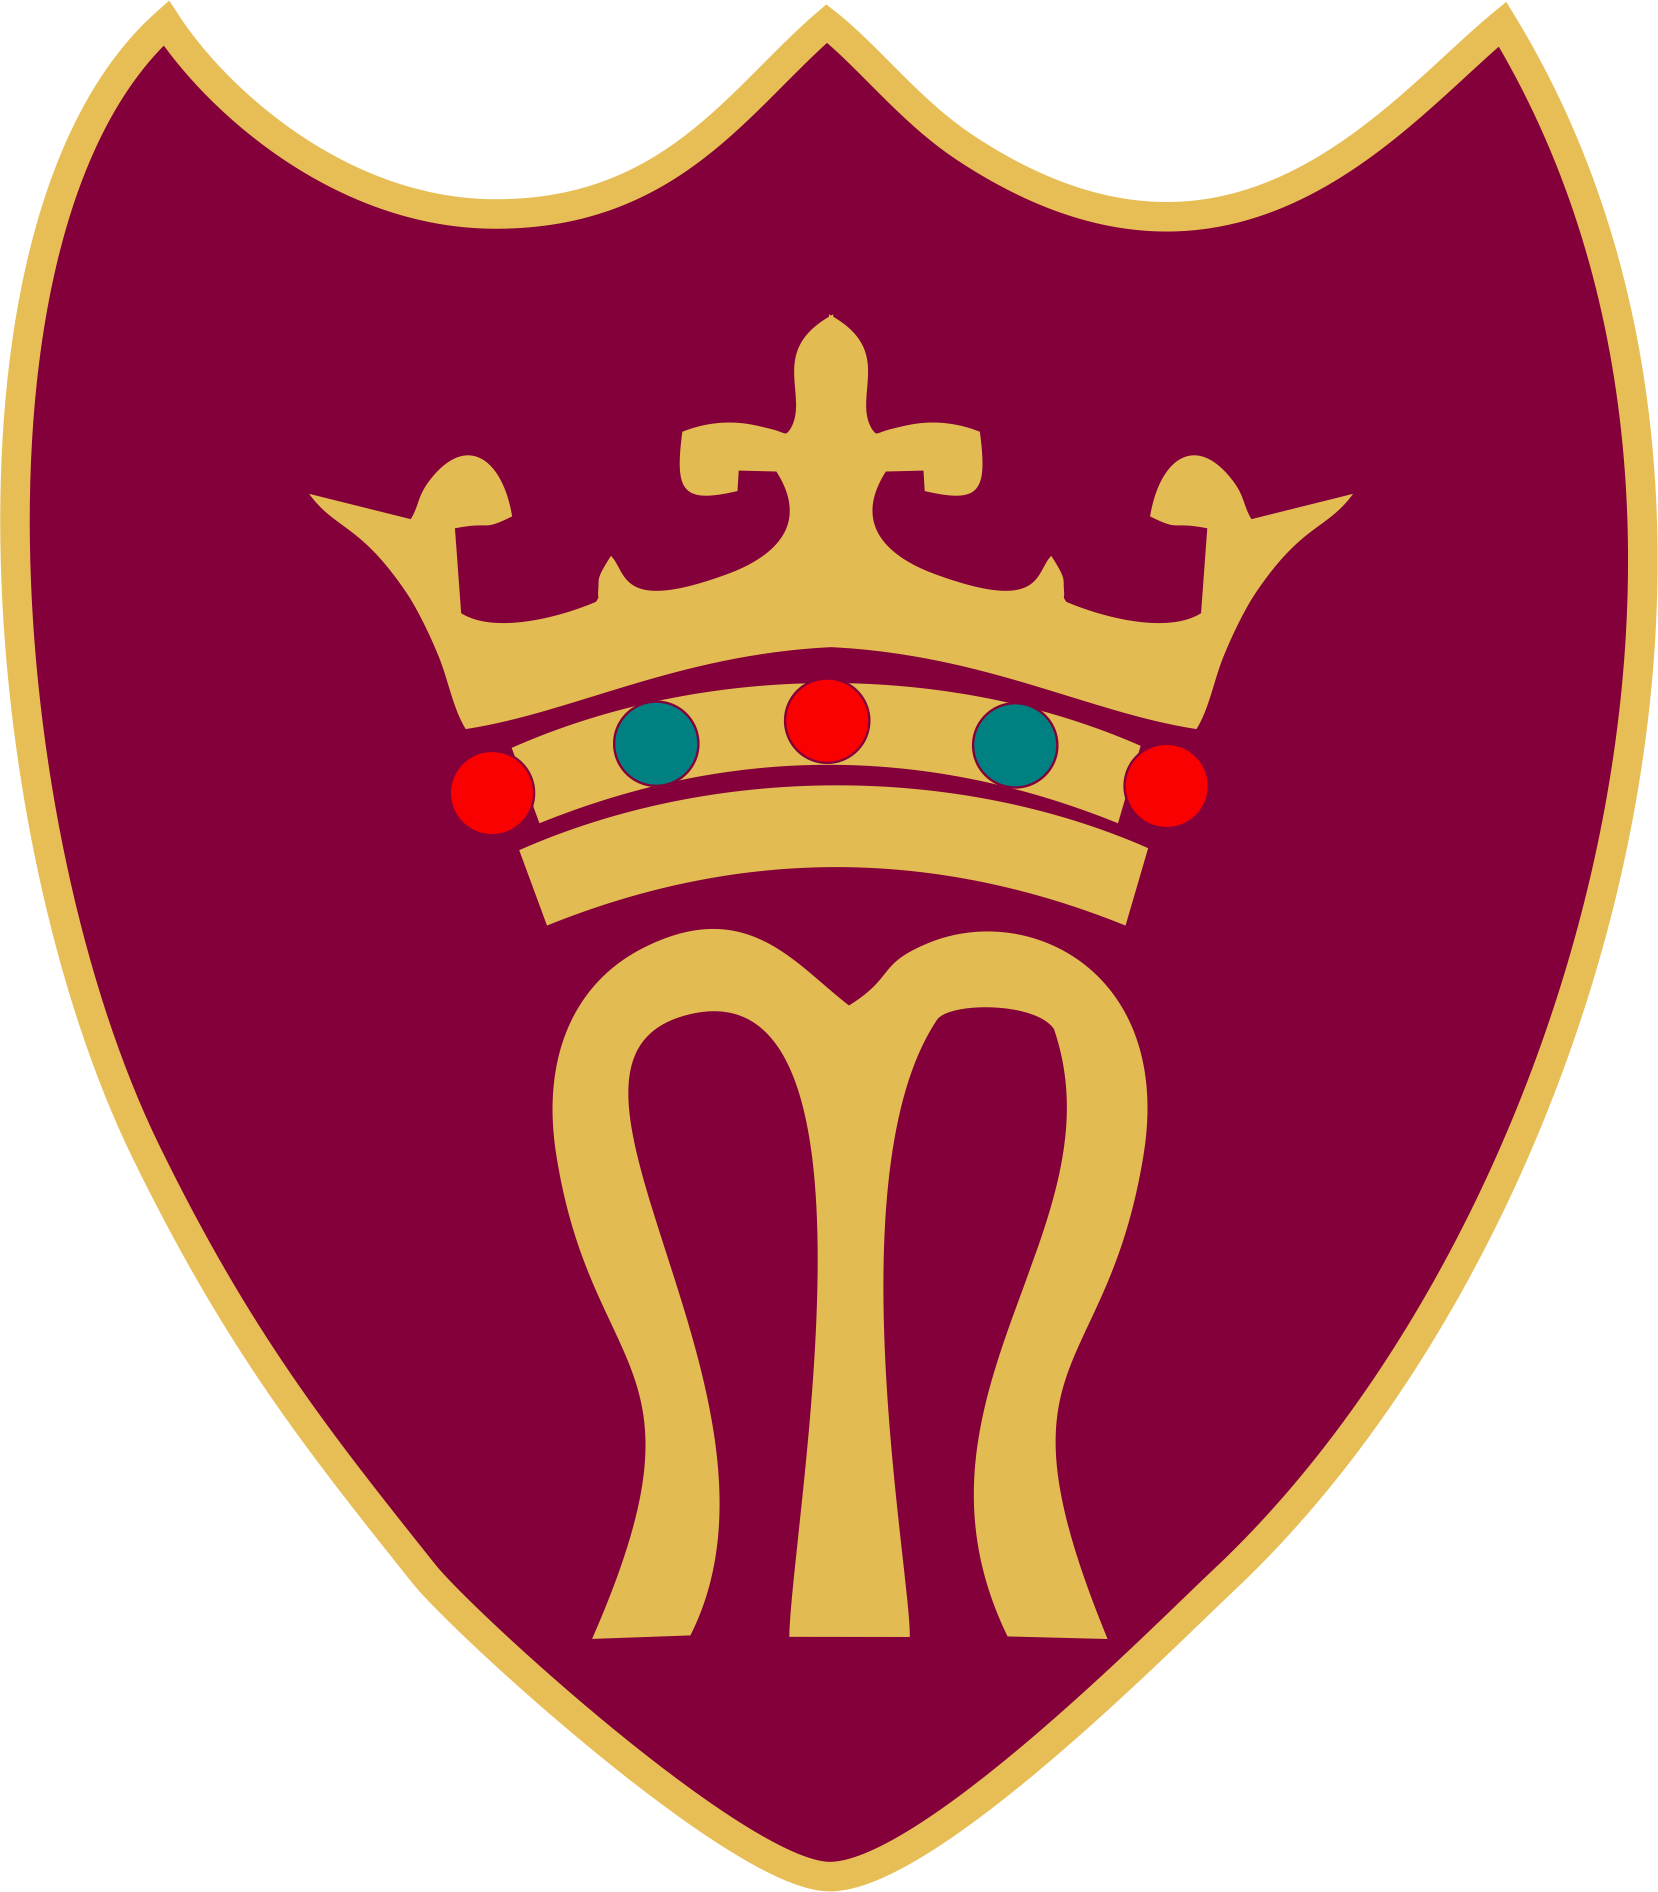 St marys badge.png